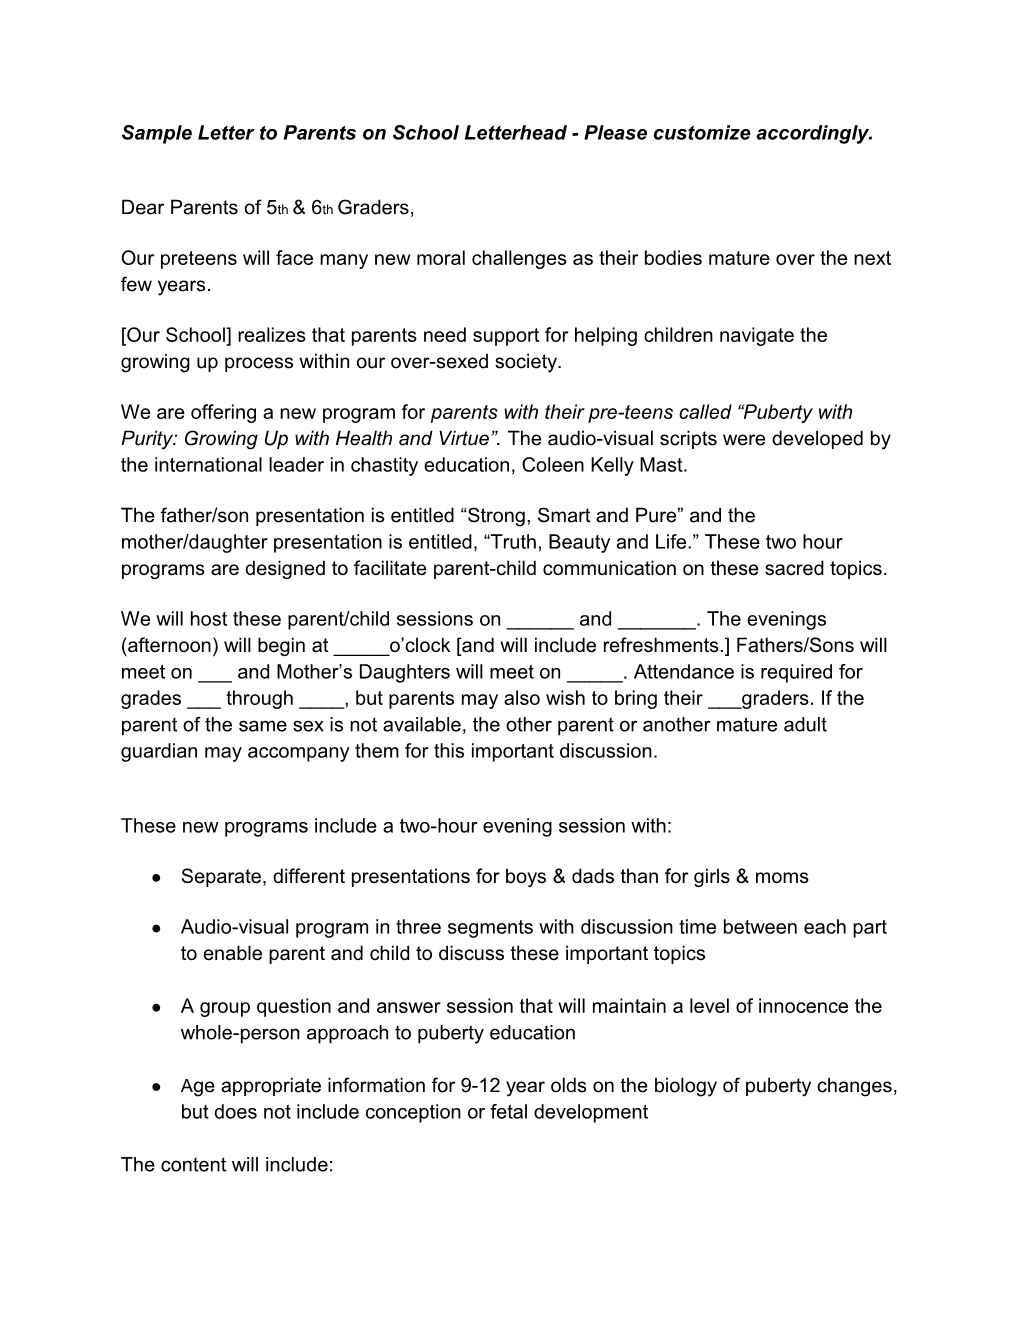 Sample Letter to Parents on School Letterhead - Please Customize Accordingly